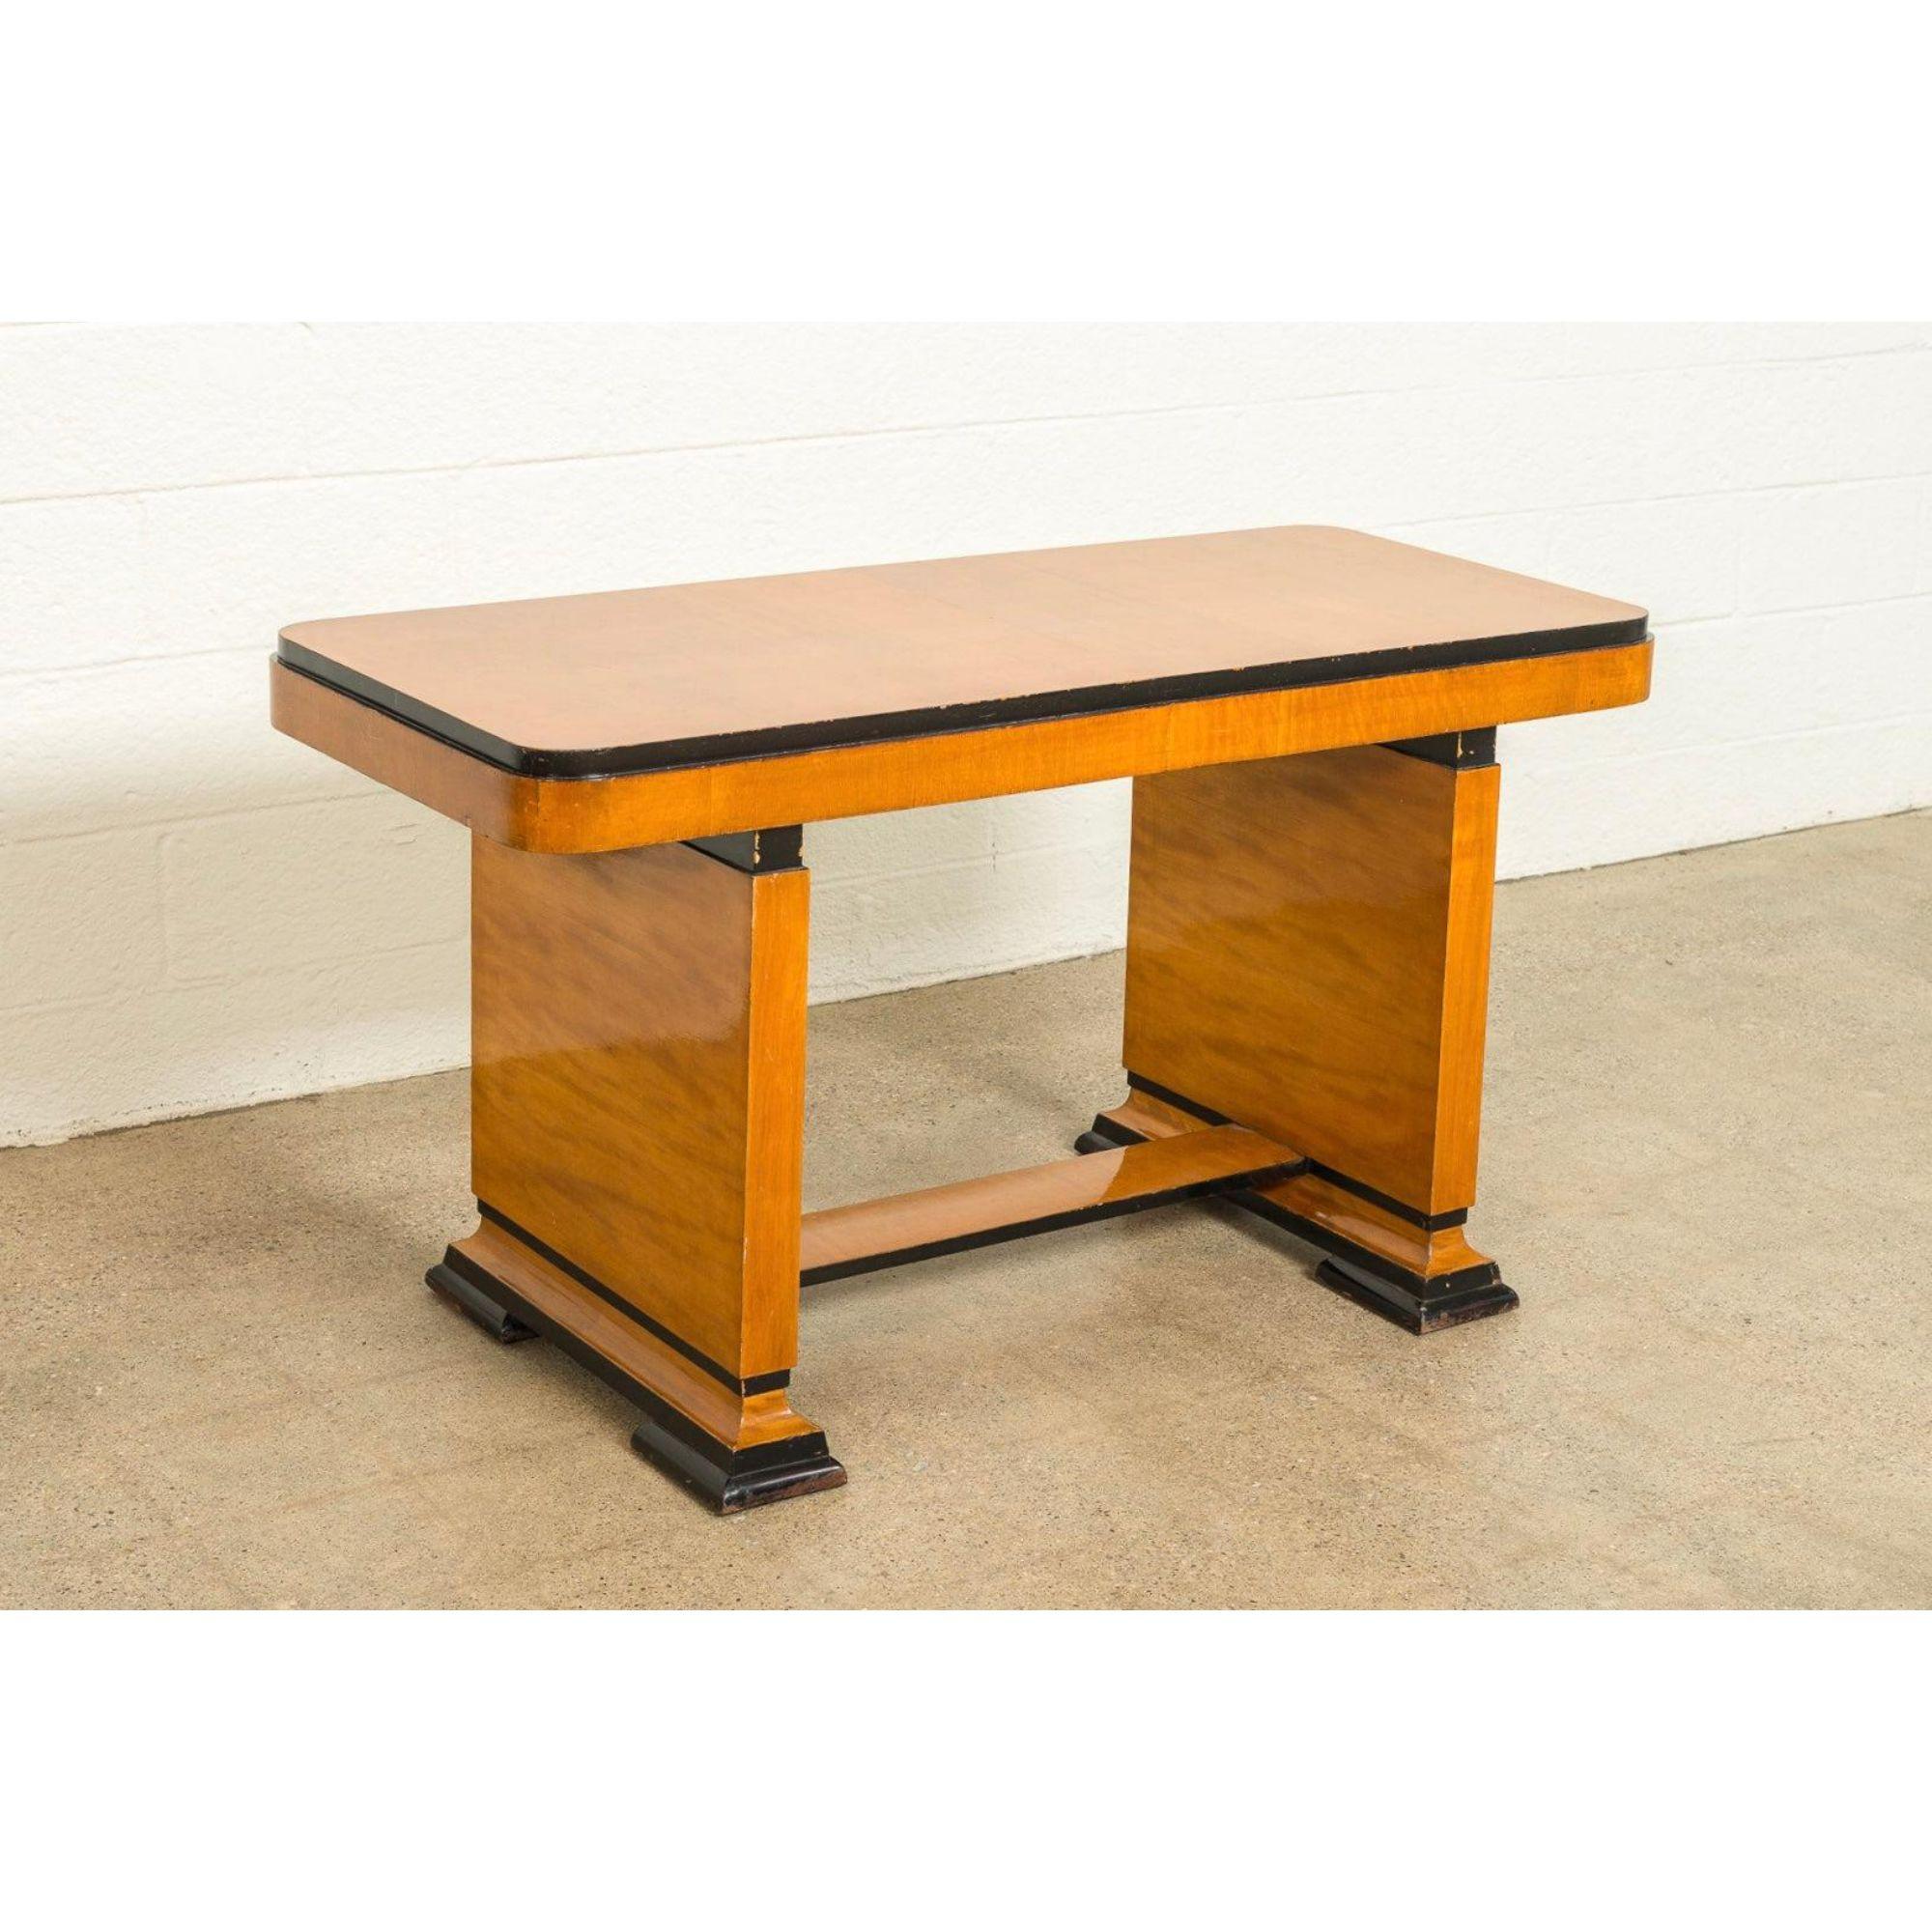 Unknown Art Deco Table or Writing Desk in Maple Wood with Ebonized Accents, circa 1930 For Sale